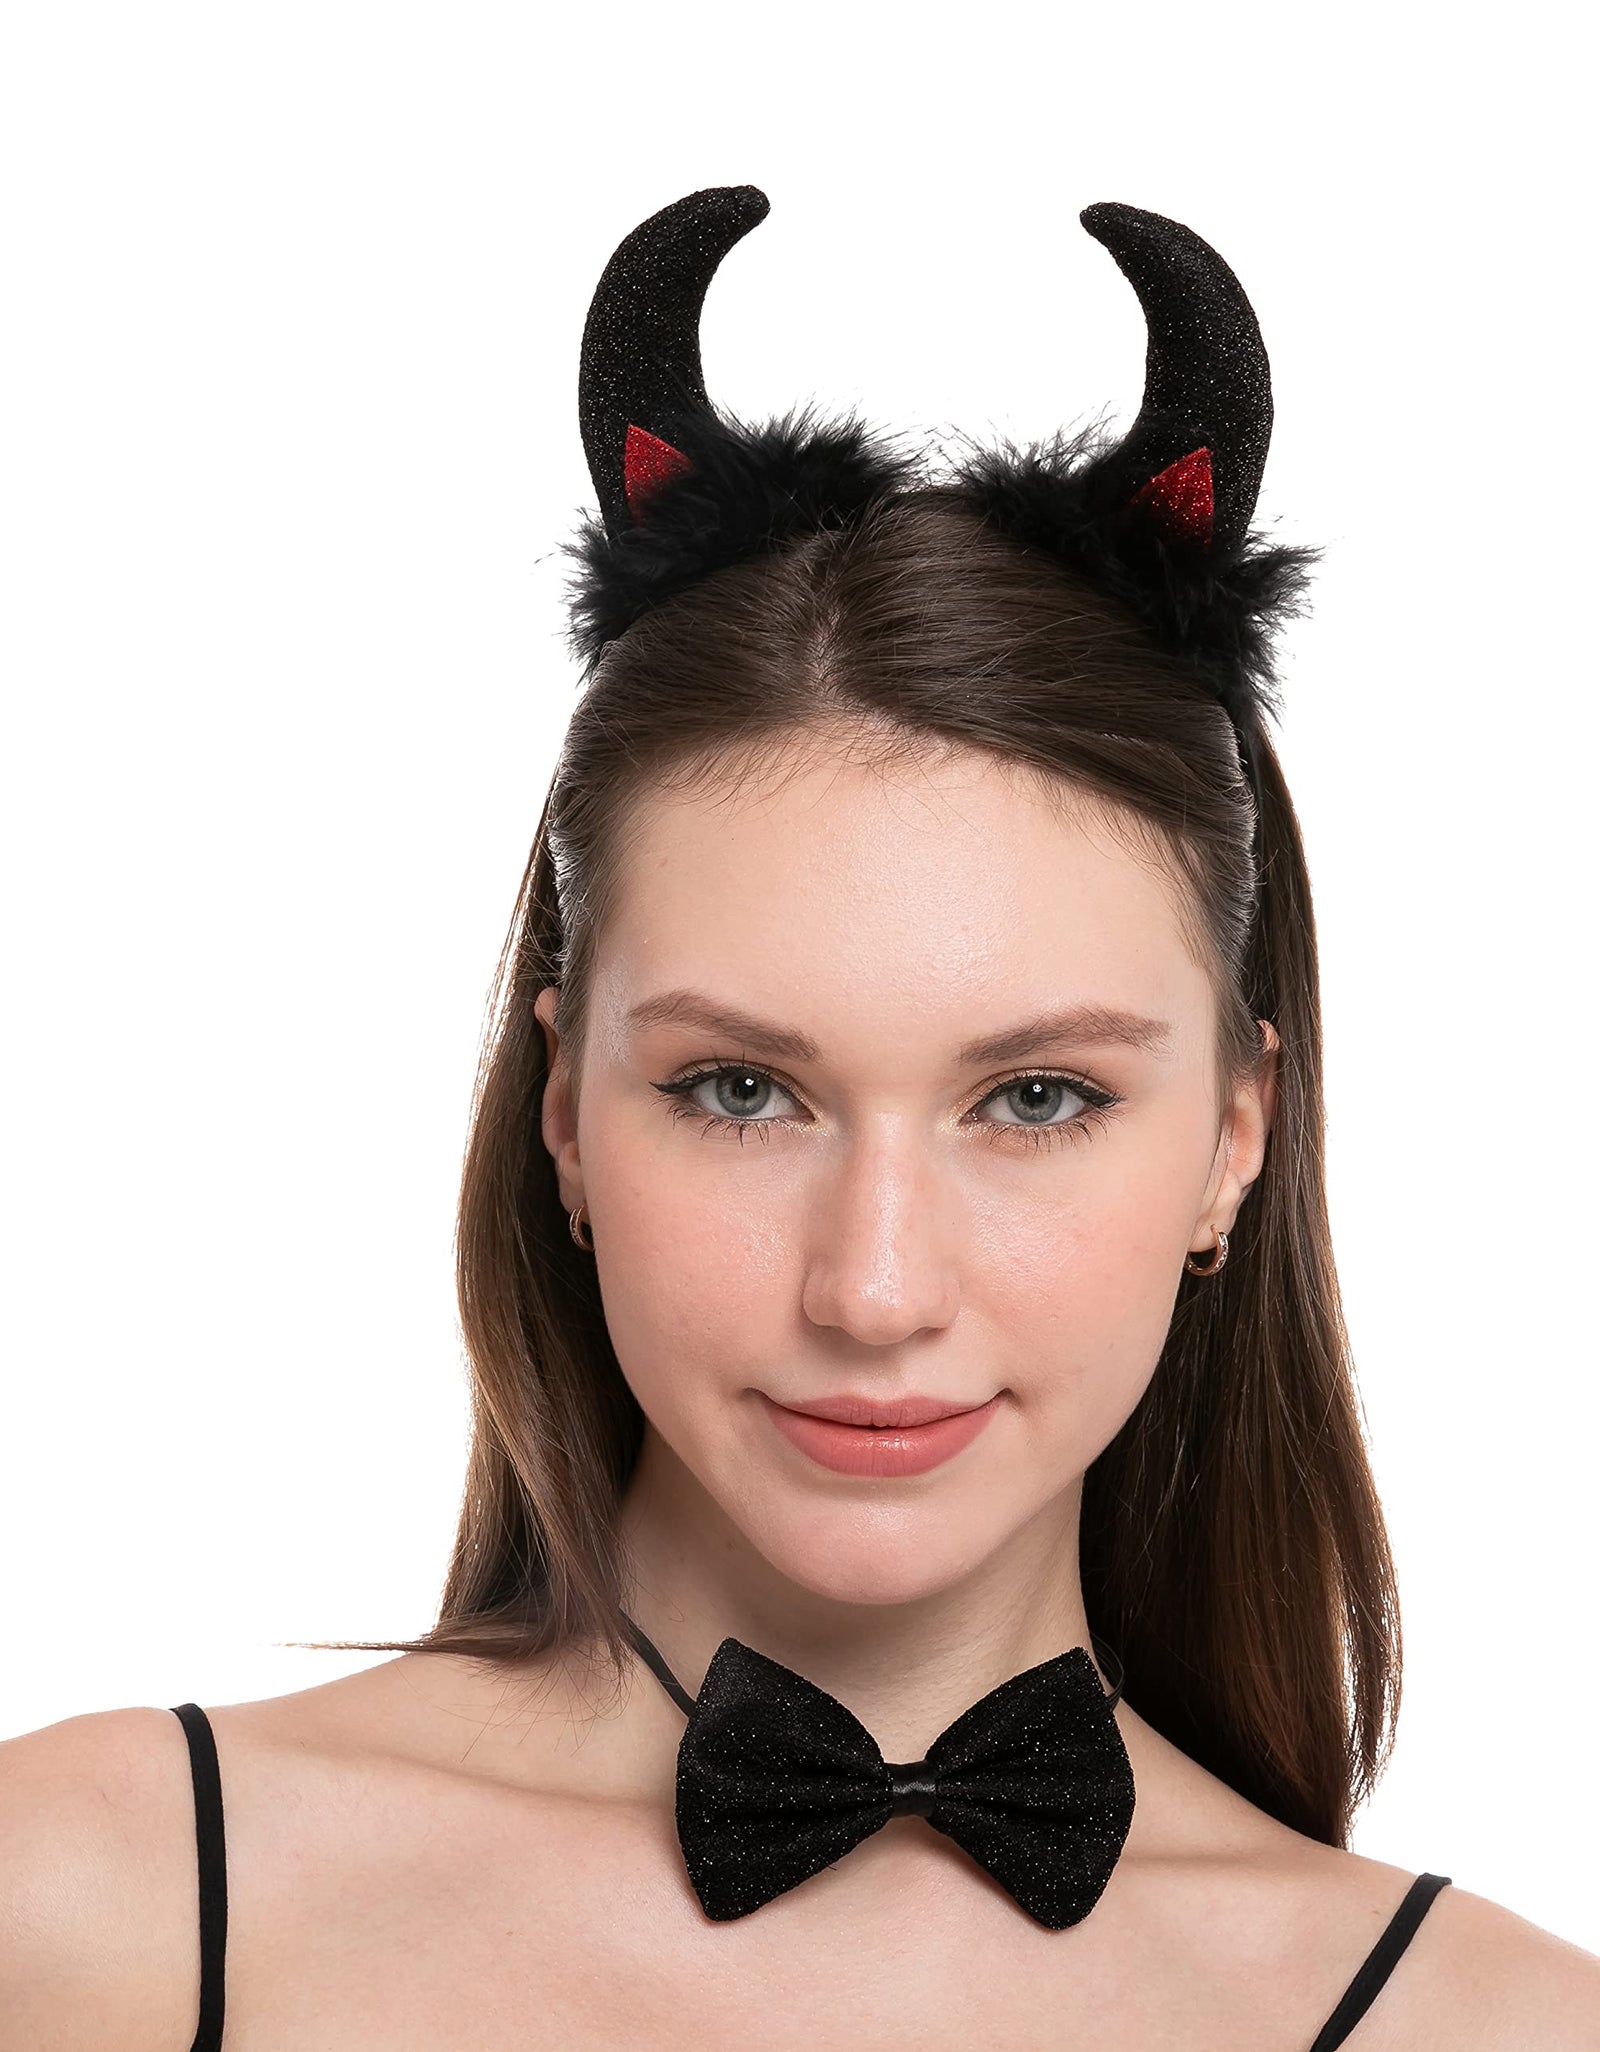 Spooktacular Creations 4 Pcs Halloween Devil Costume Set Demon Costume with Black Devil Horn Headband, Devil Pitchfork, Bow Tie, and Tail for Halloween Cosplay Party Accessories